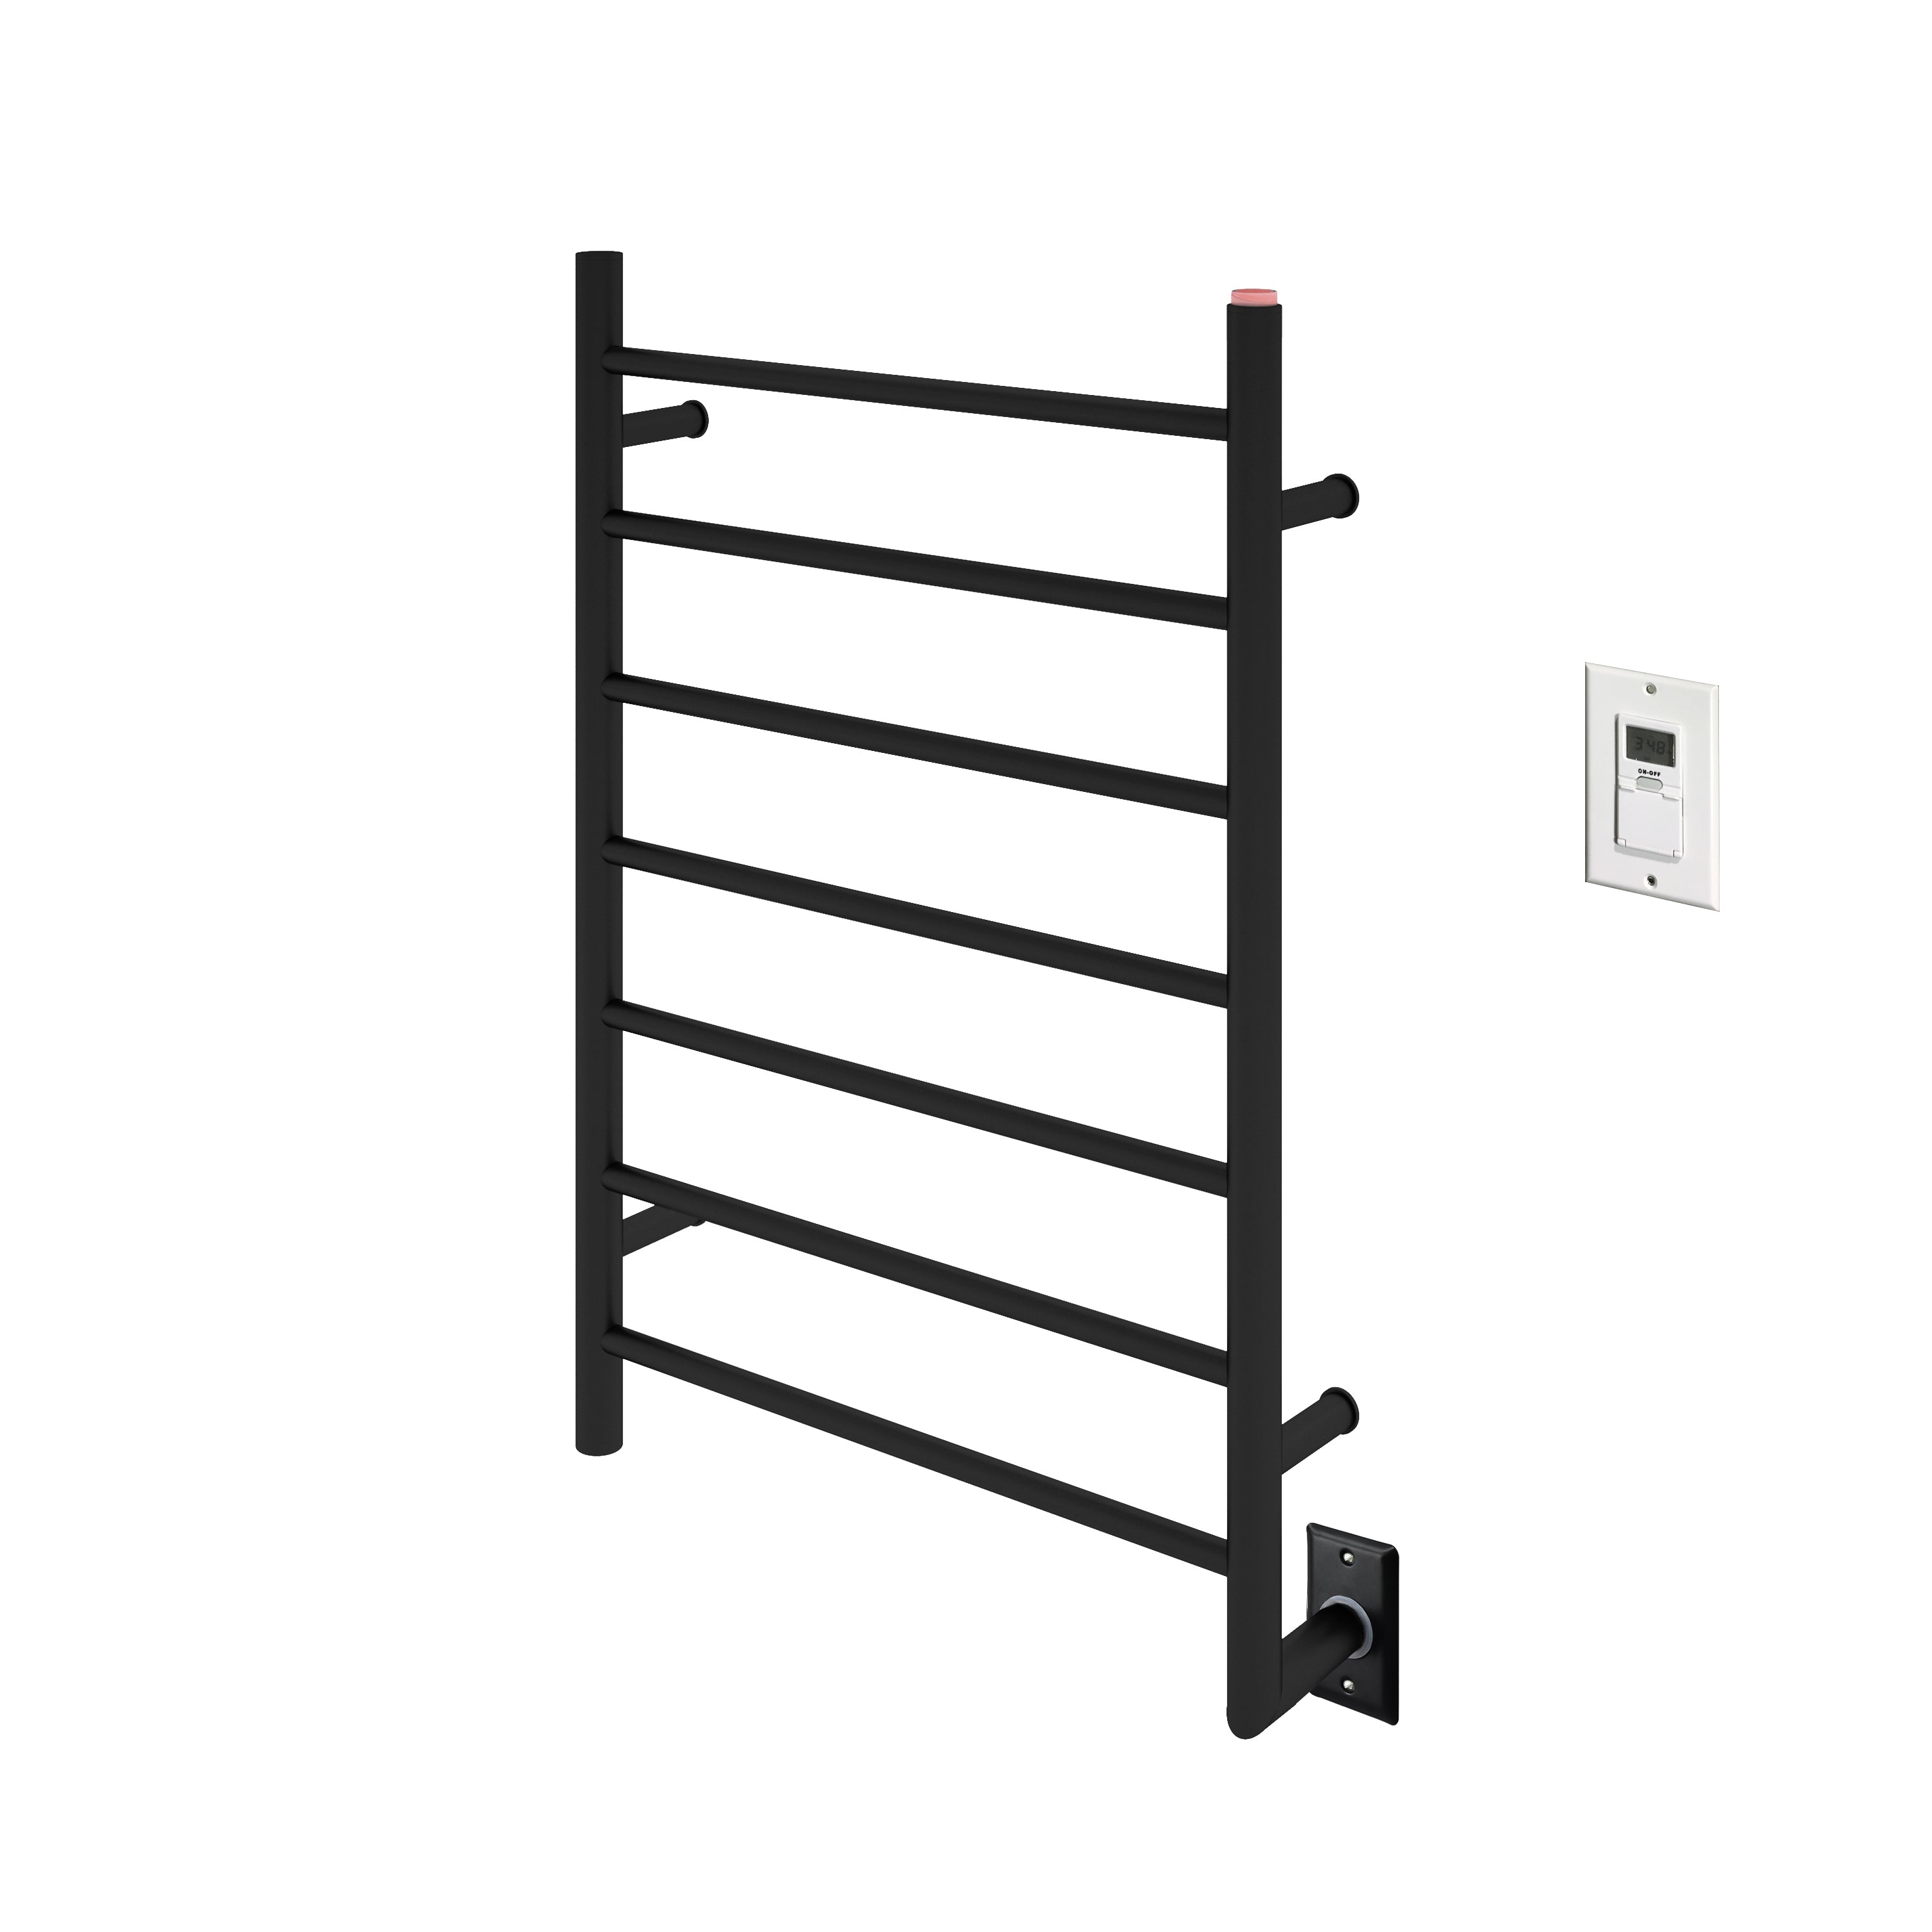 Comfort 7-Bar Hardwired Towel Warmer in Matte Black with Wall Timer